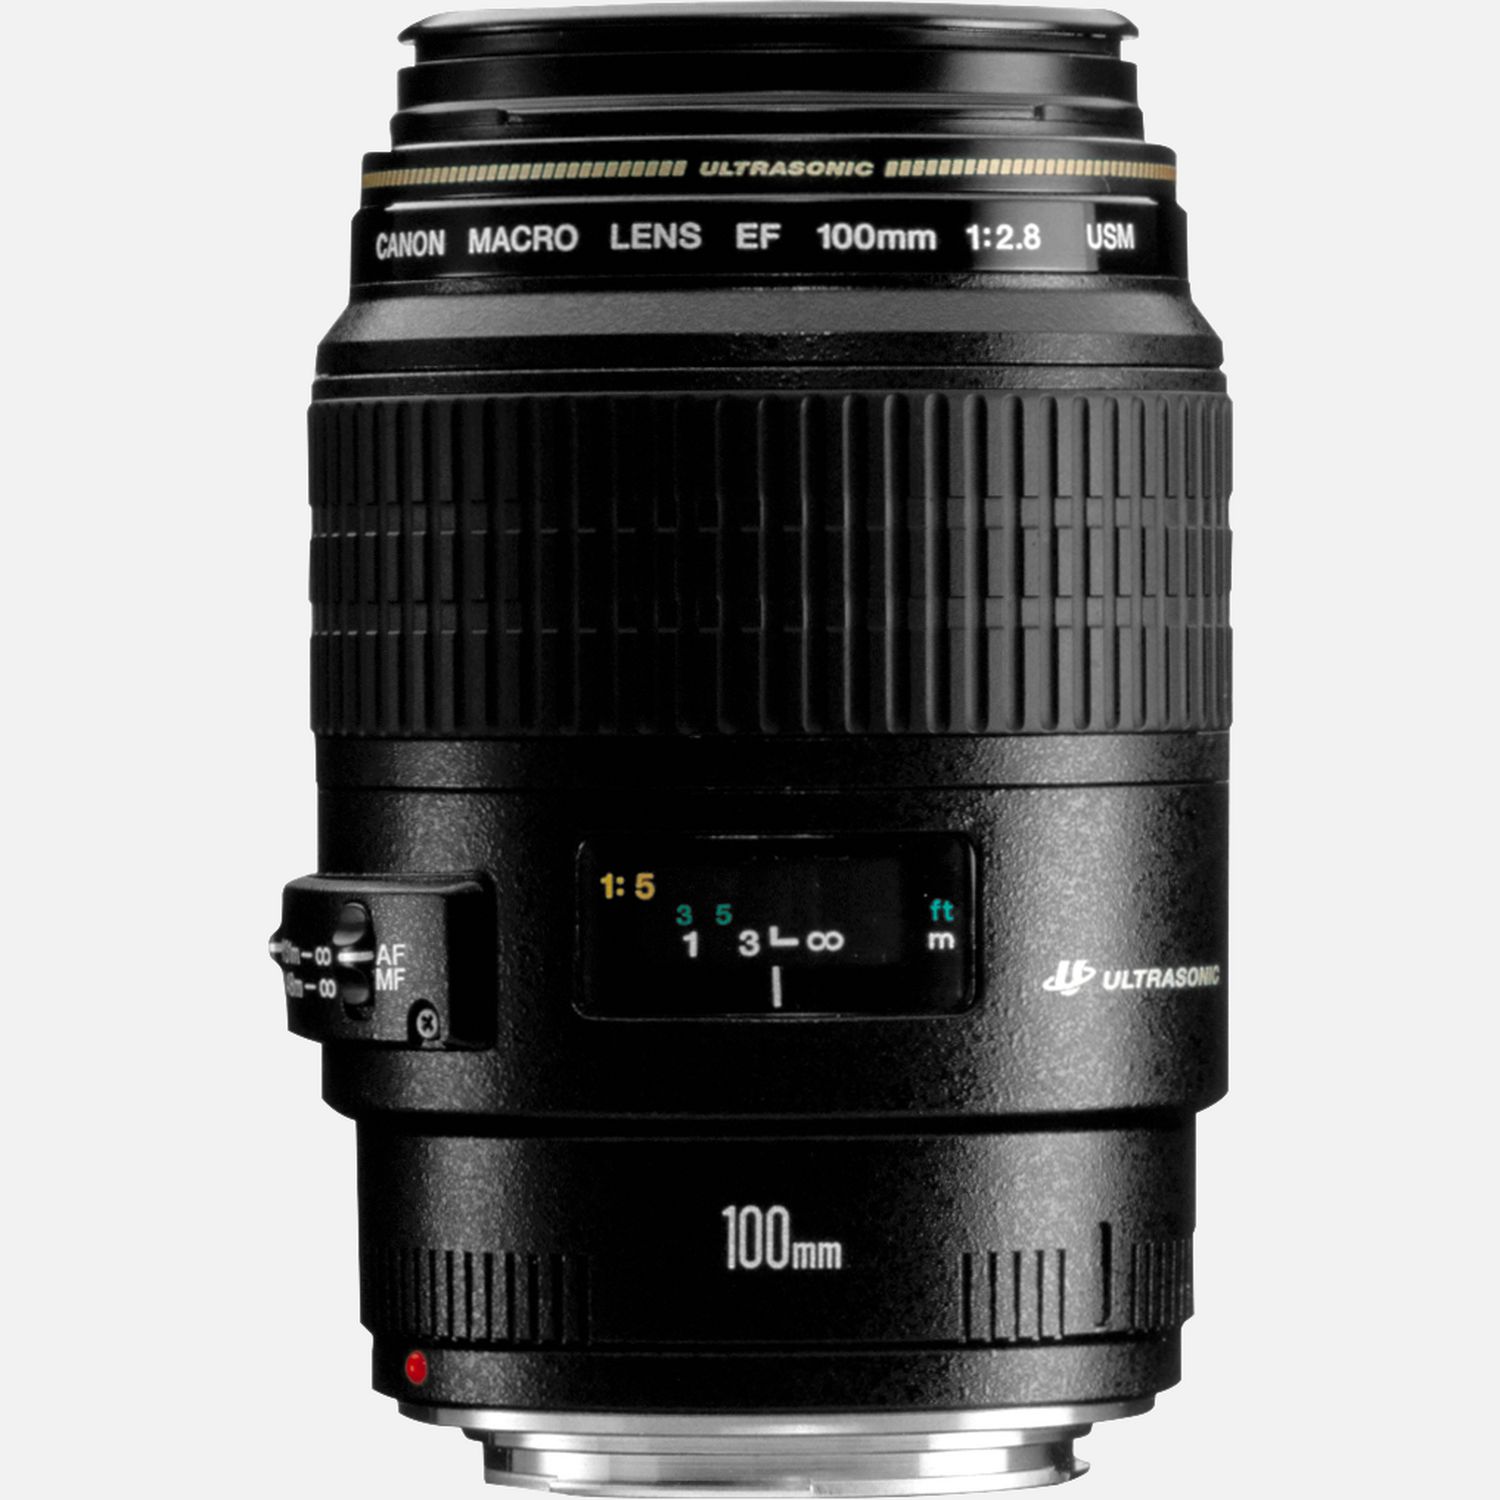 Buy Canon EF 100mm f/2.8 Macro USM Lens in Discontinued — Canon UK Store